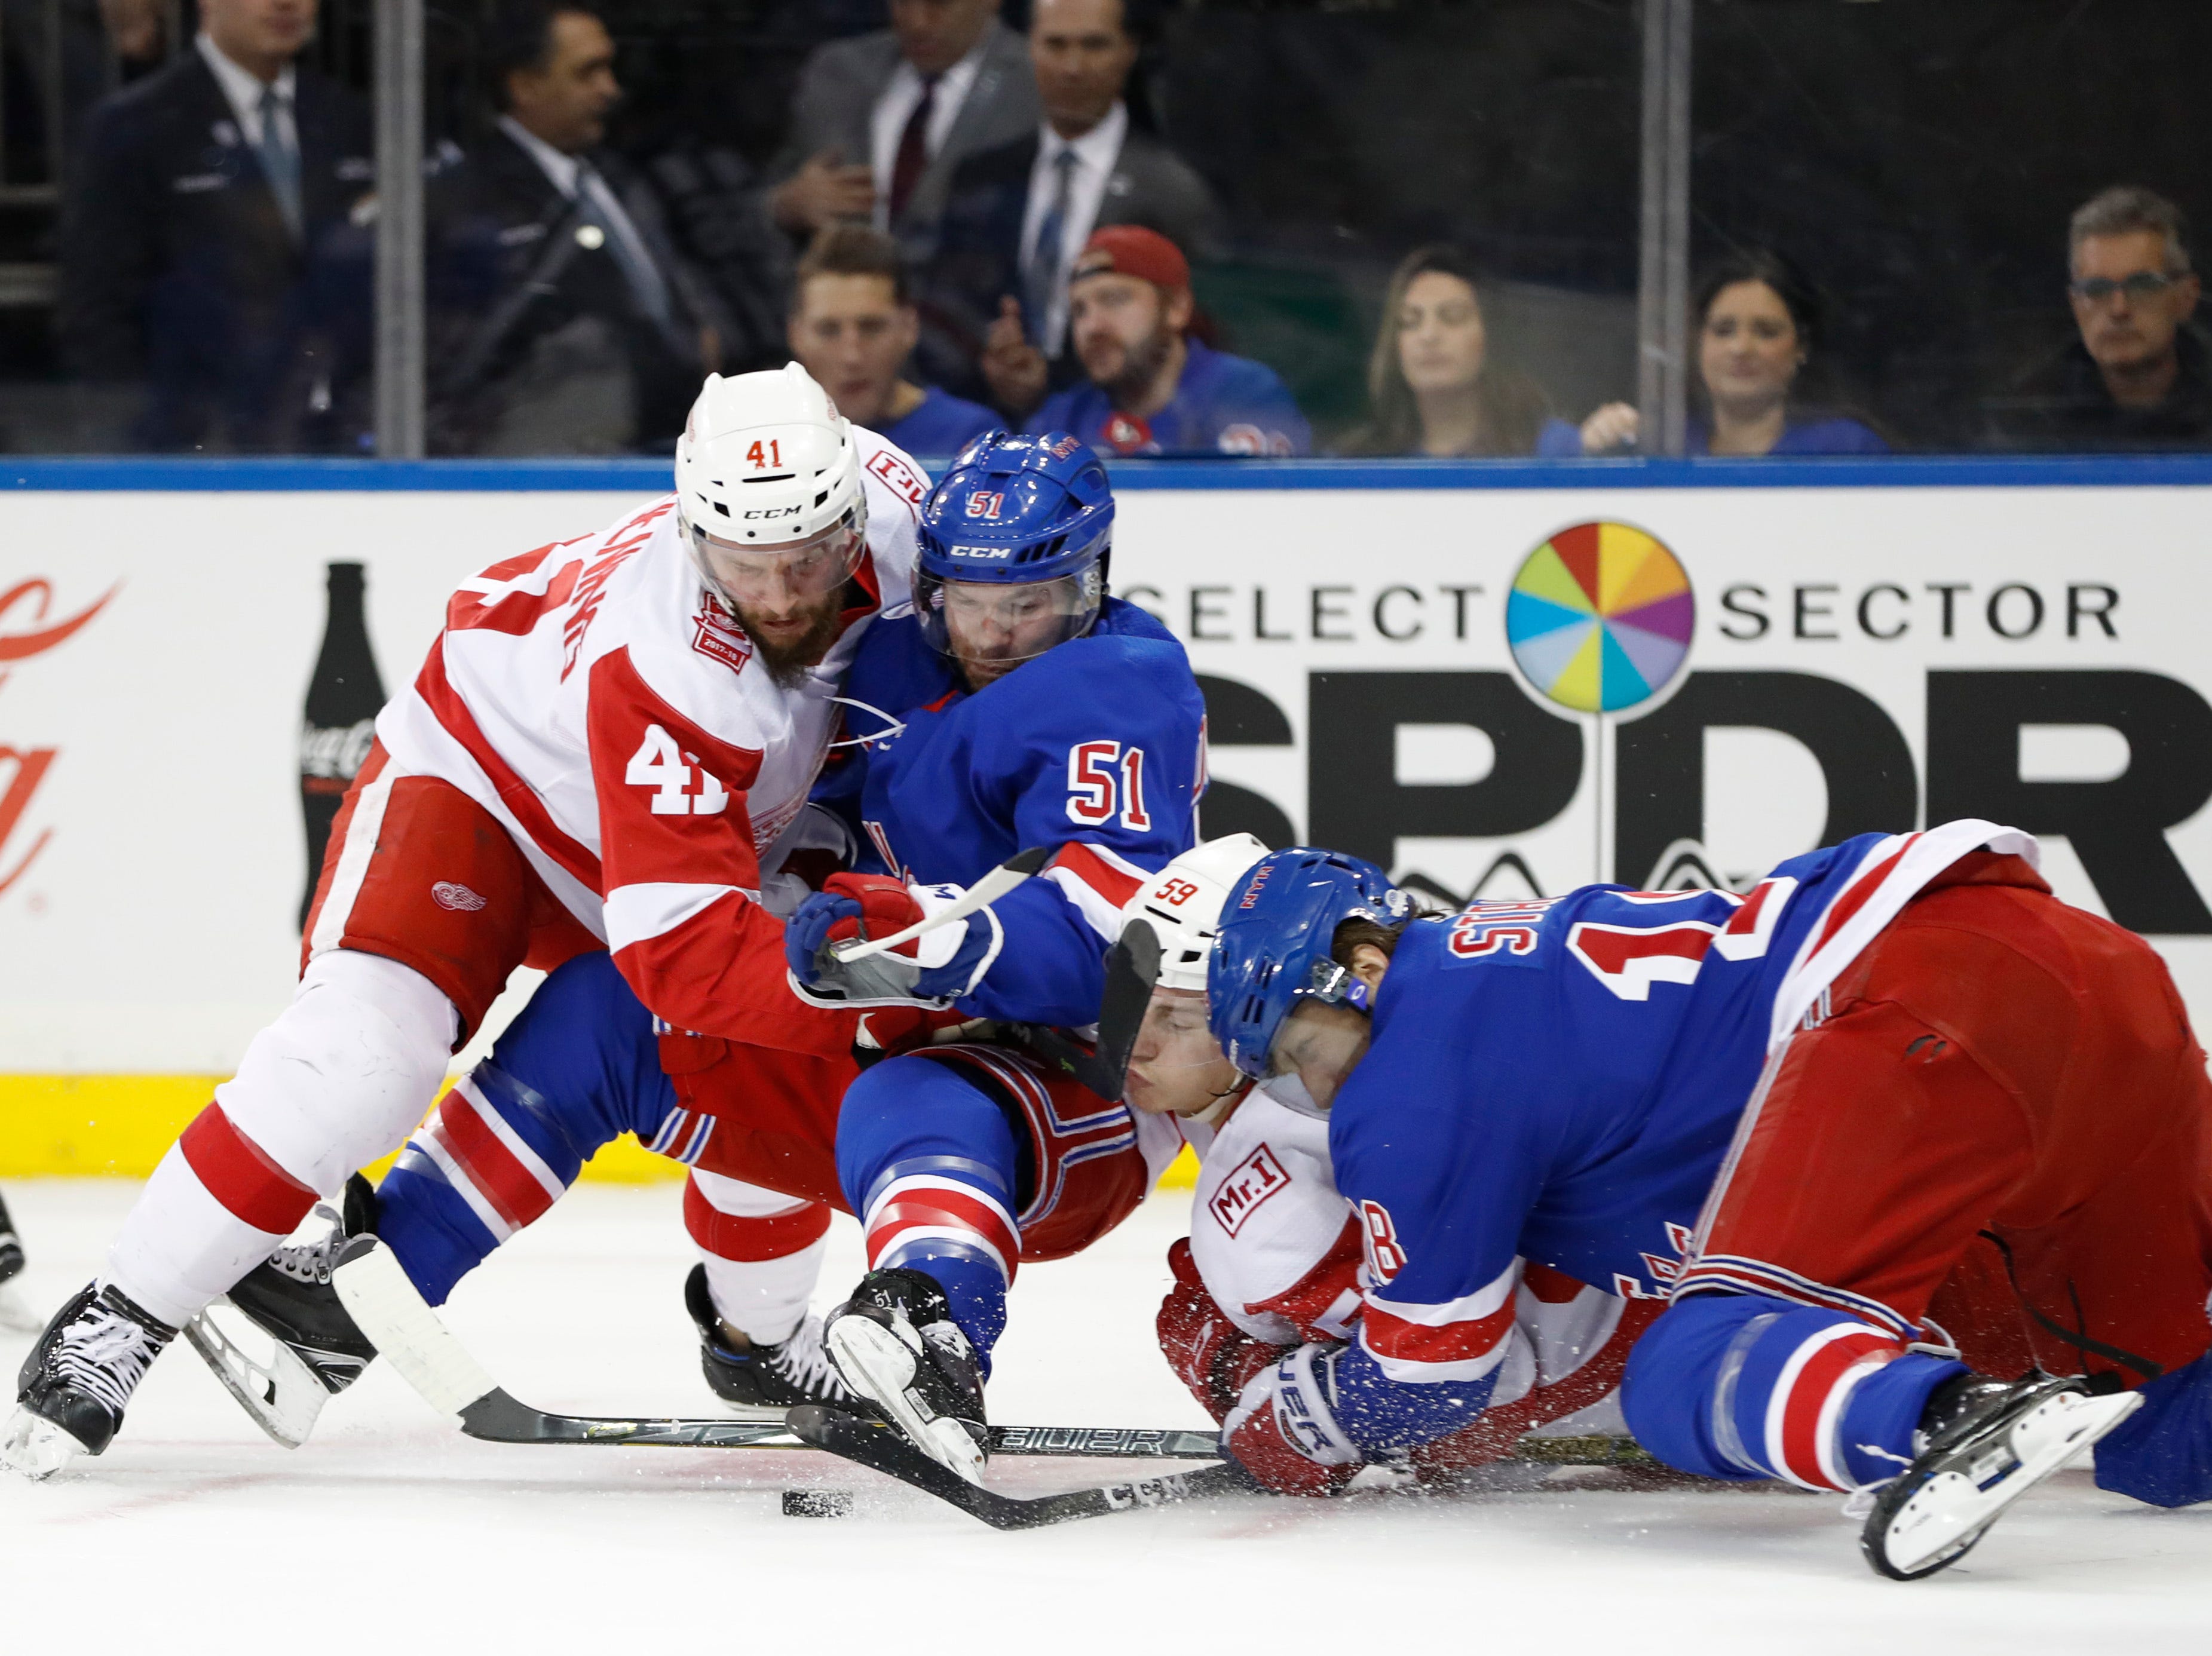 Daley scores on tip late in OT, Red Wings beat Rangers 3-2